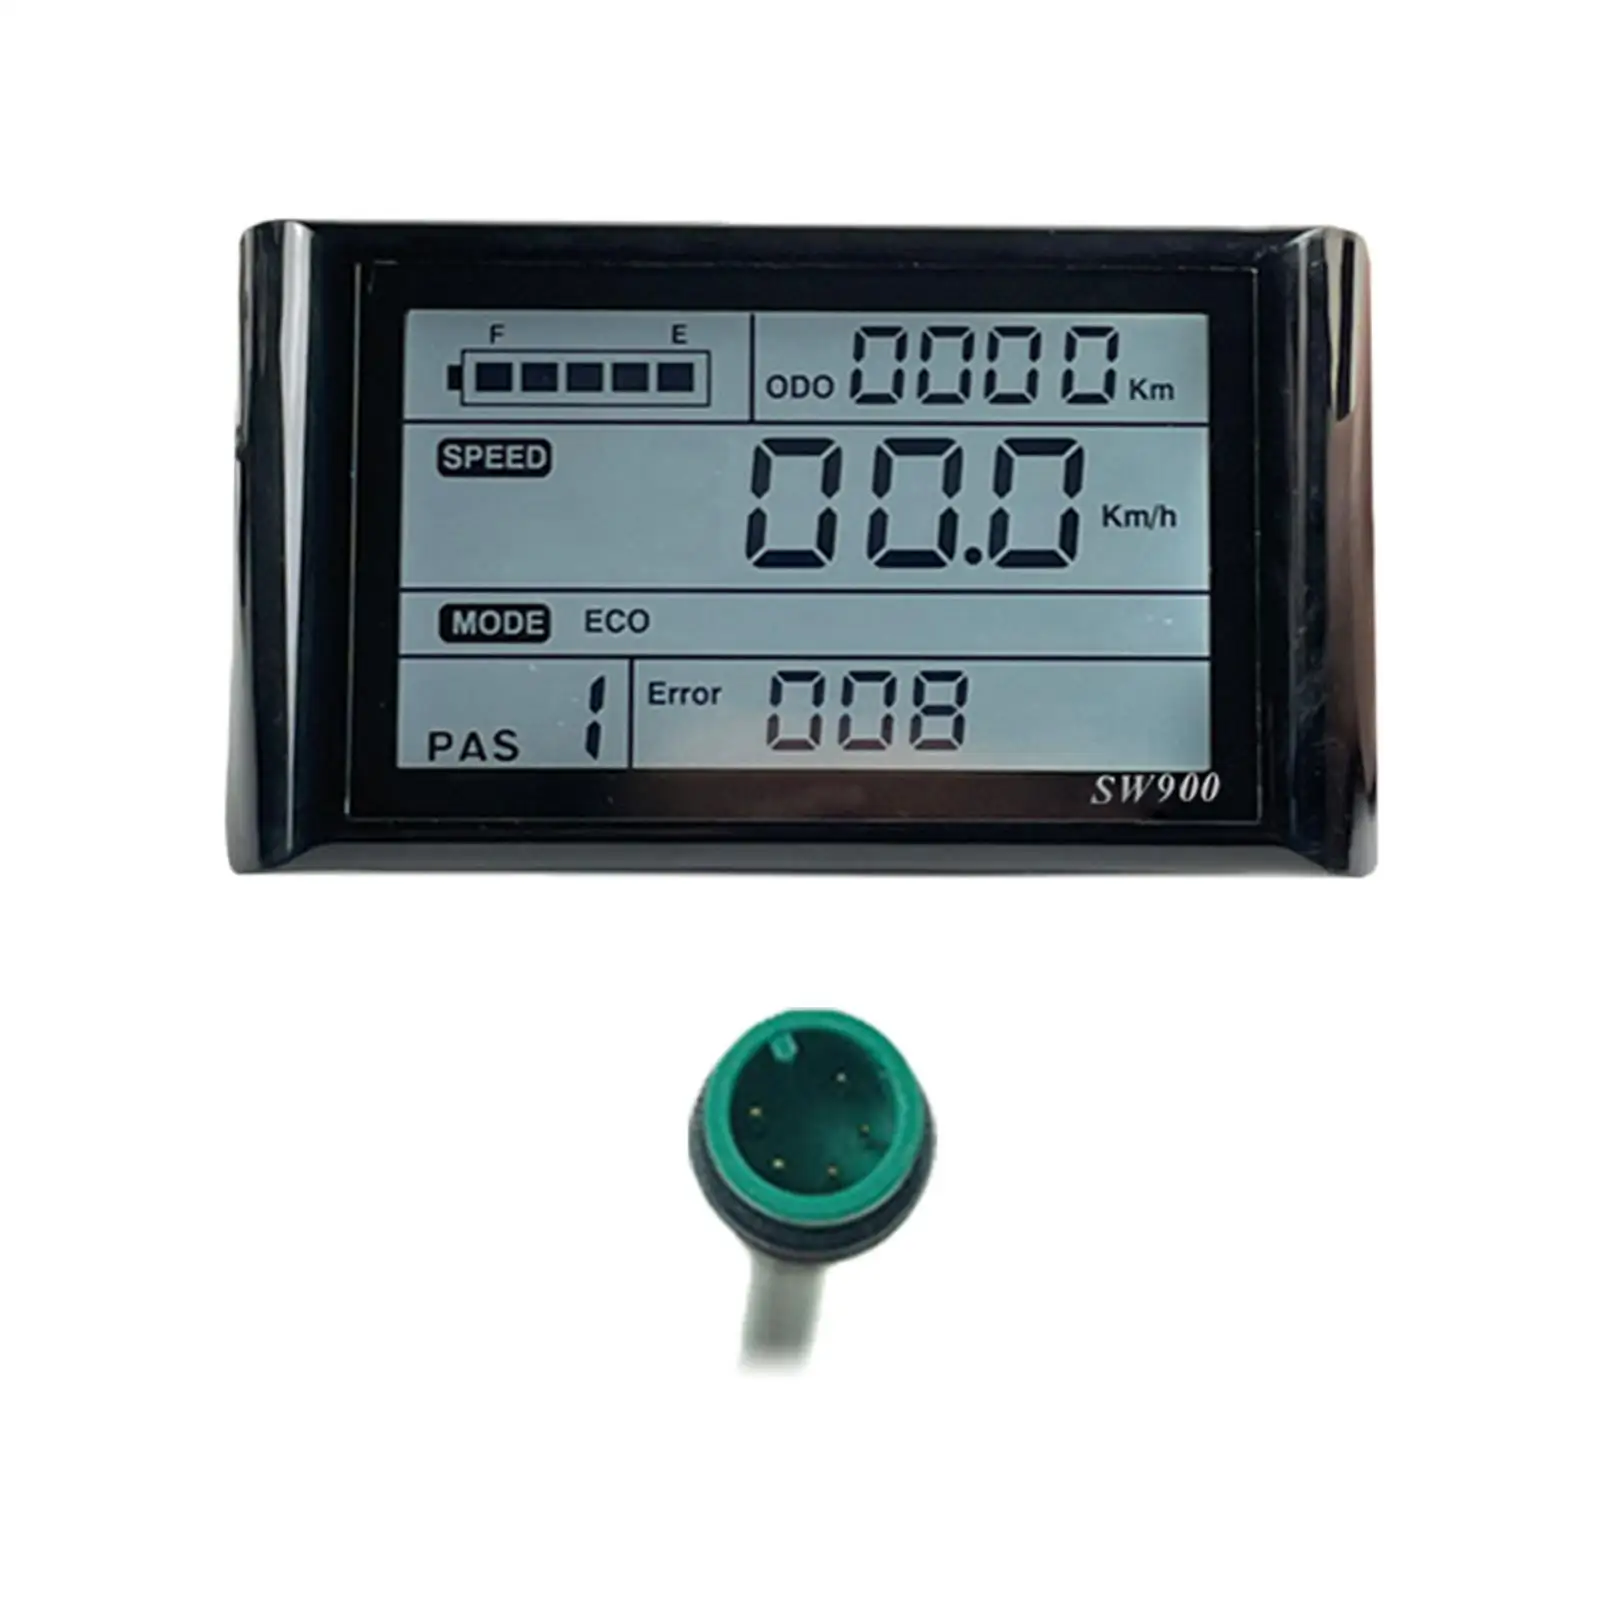 Electric Bike LCD Display Meter 5 Pin W/ Waterproof Plug Accessories Easy to Install Digital Modification for Outdoor Scooter